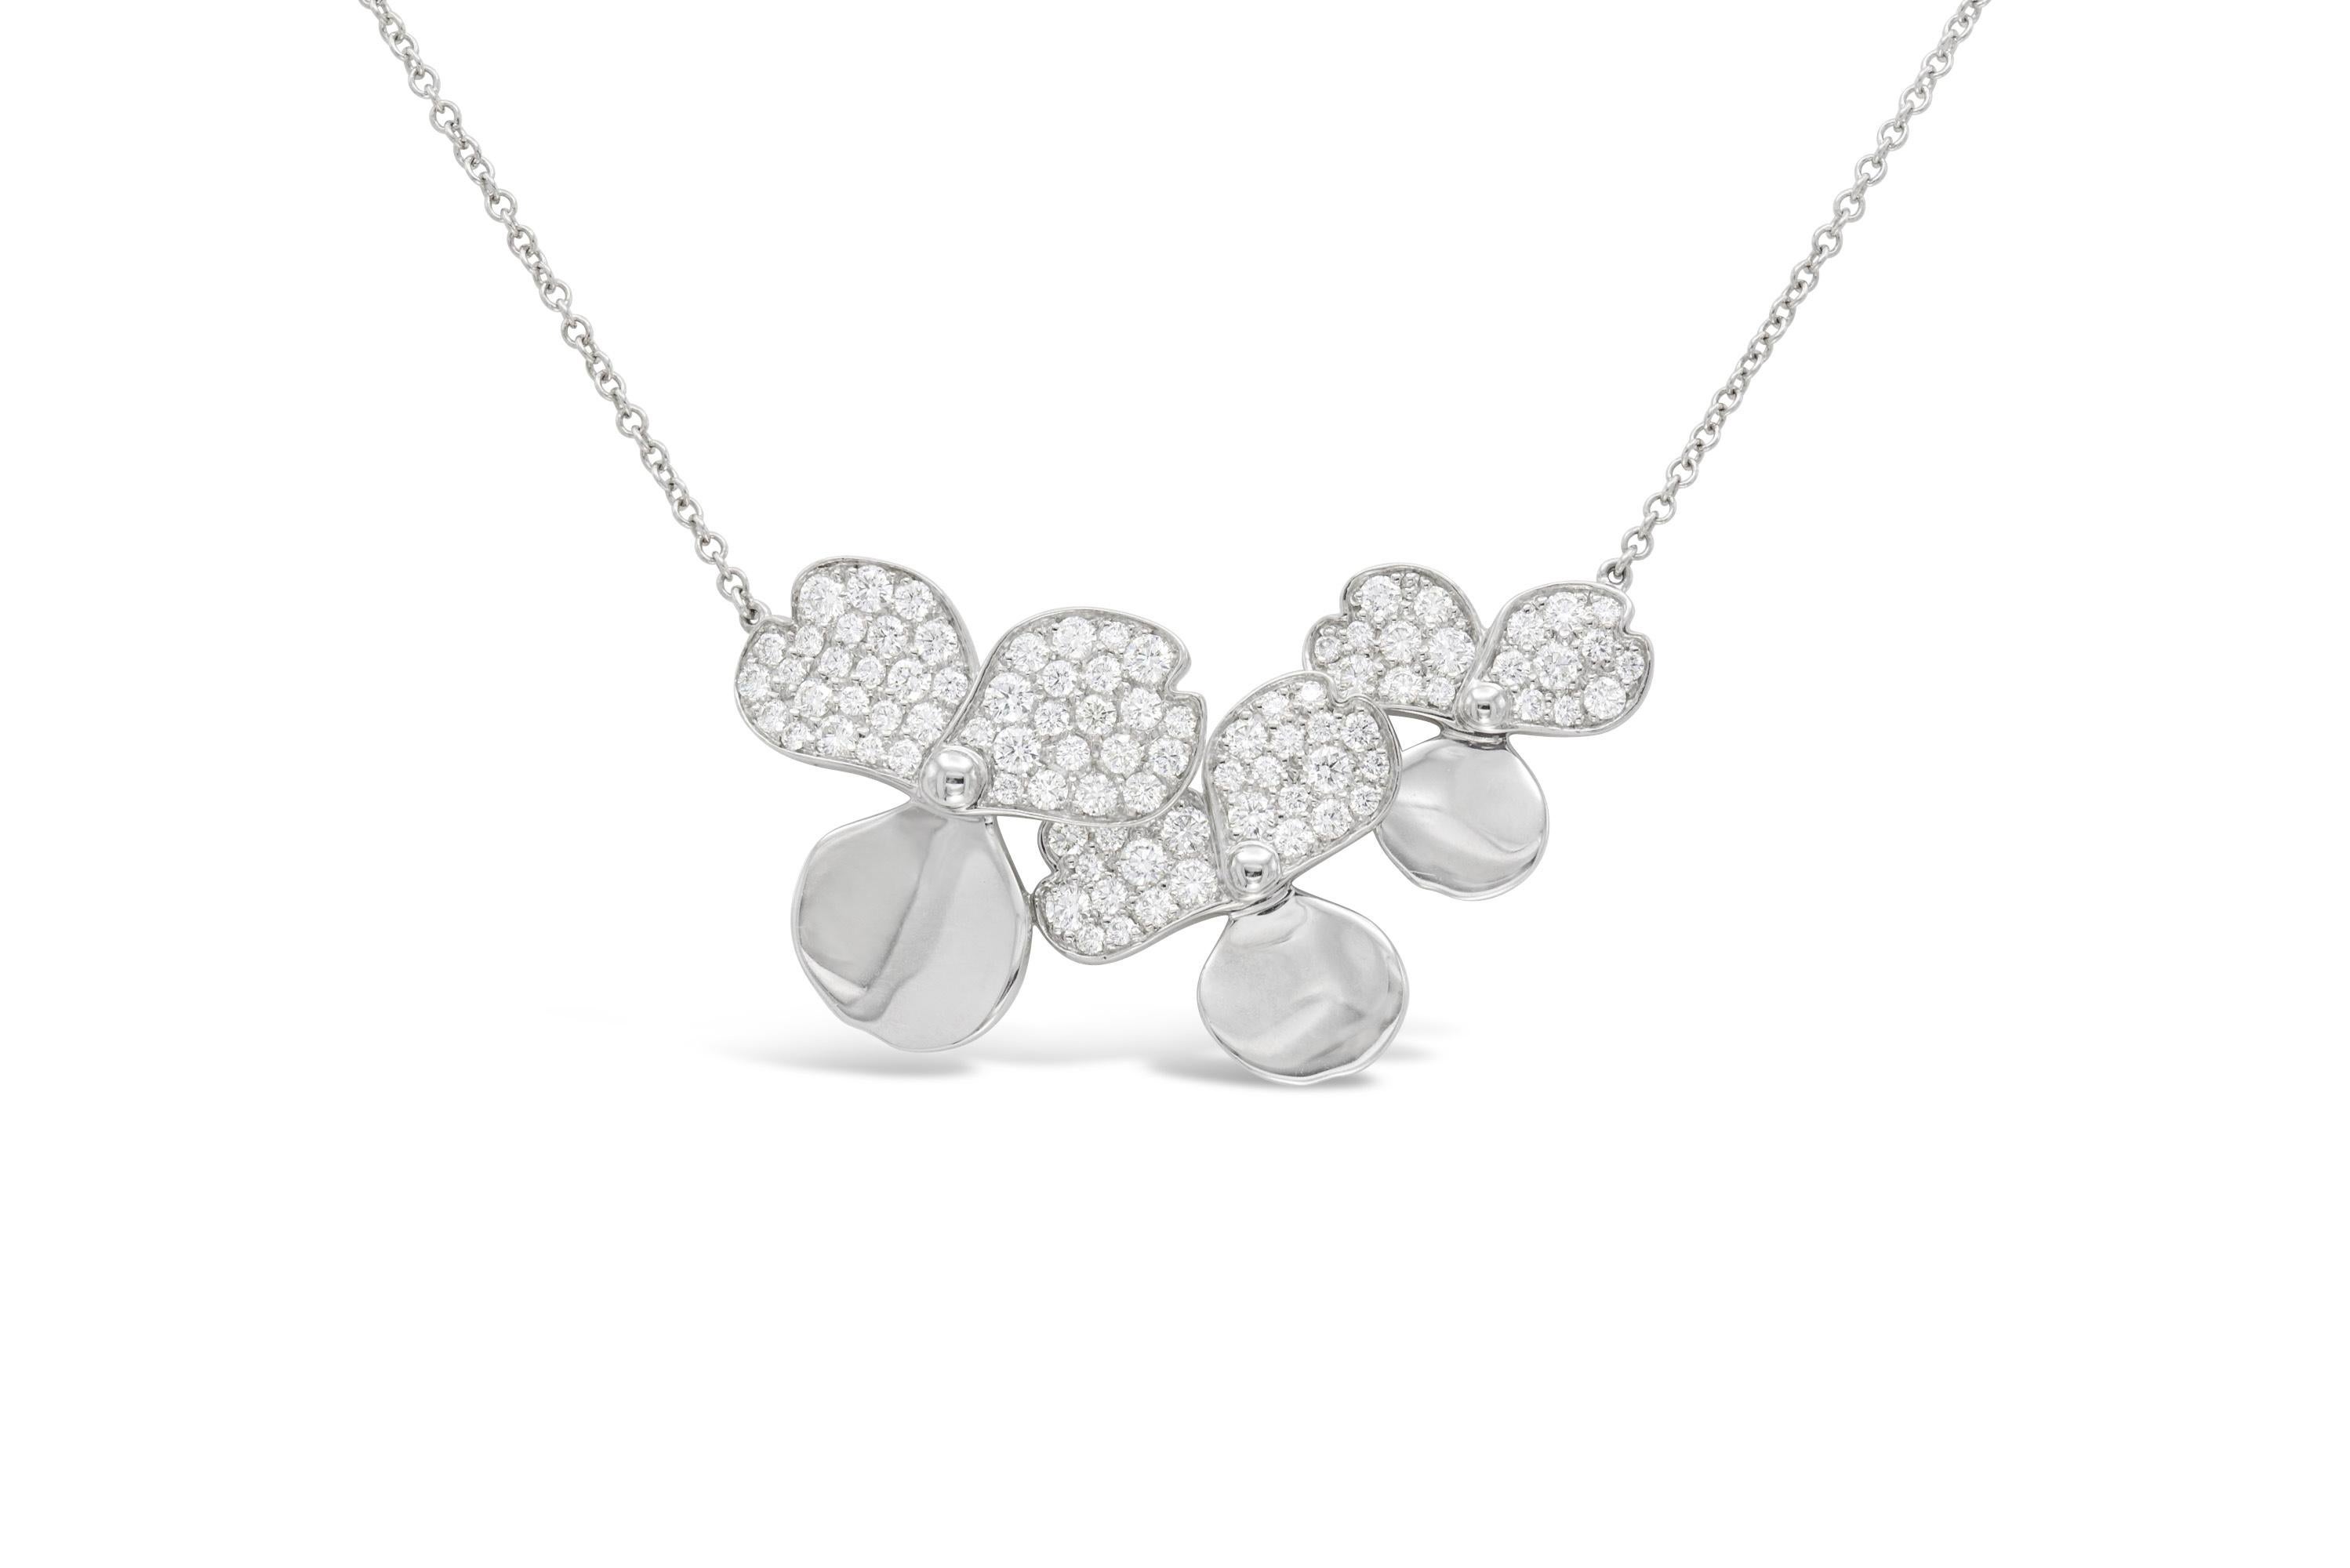 Finely crafted in platinum with round-brilliant cut diamonds weighing 0.78 carat total.
16 inch chain length.
Signed by Tiffany & Co., featured in their 